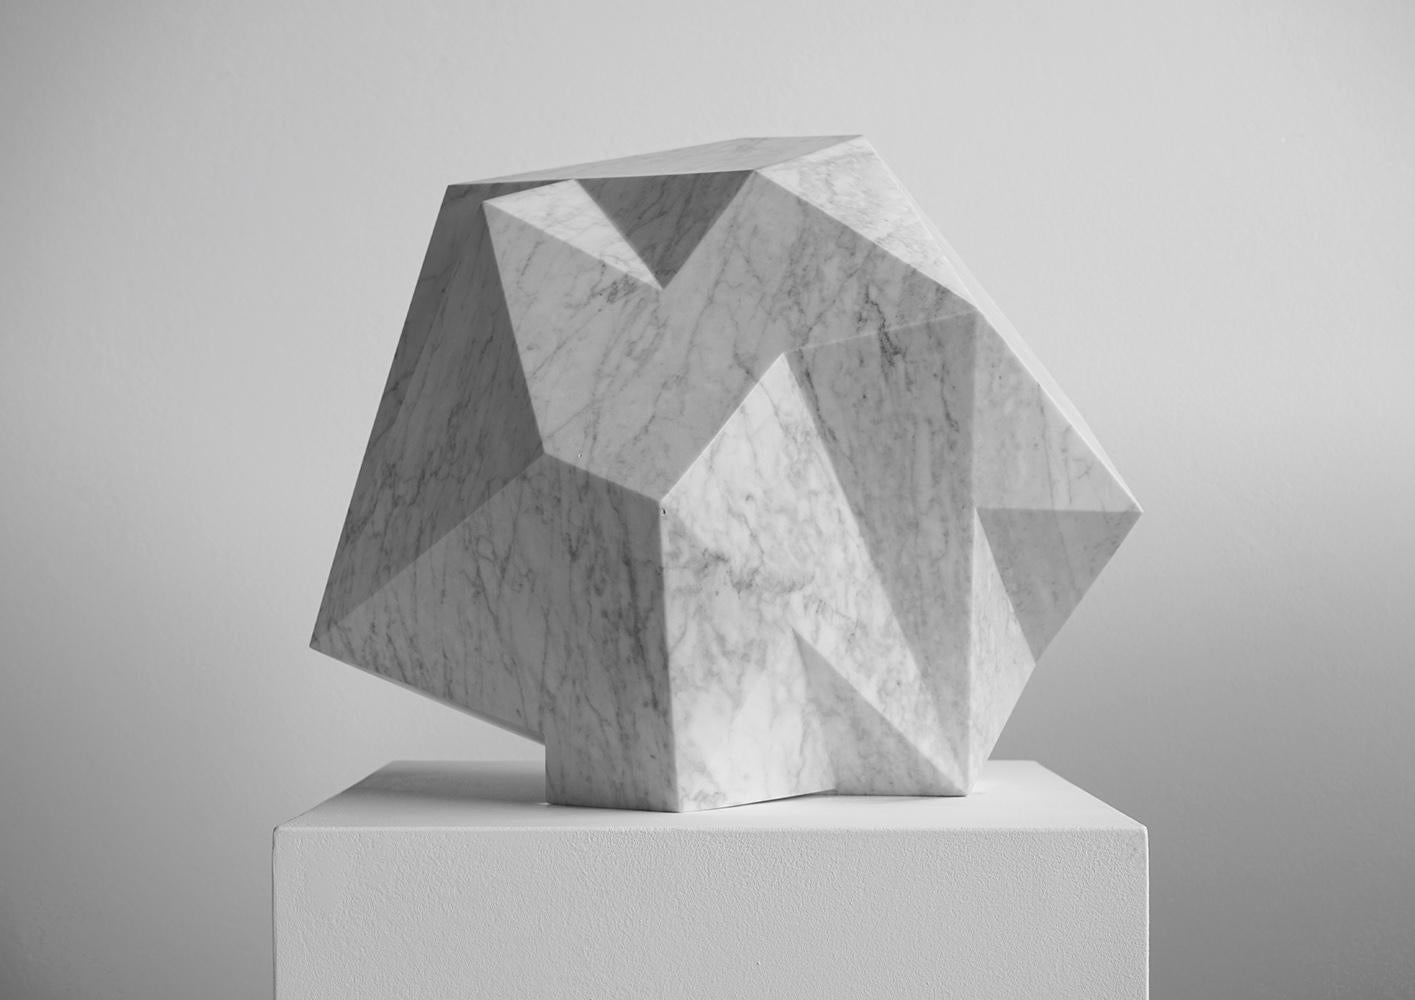 August Moon Waxing is a unique Carrara marble sculpture by contemporary artist Richard Perry, dimensions are 35 × 35 × 35 cm (13.8 × 13.8 × 13.8 in). 
The sculpture is signed and comes with a certificate of authenticity.

This sculpture is a good